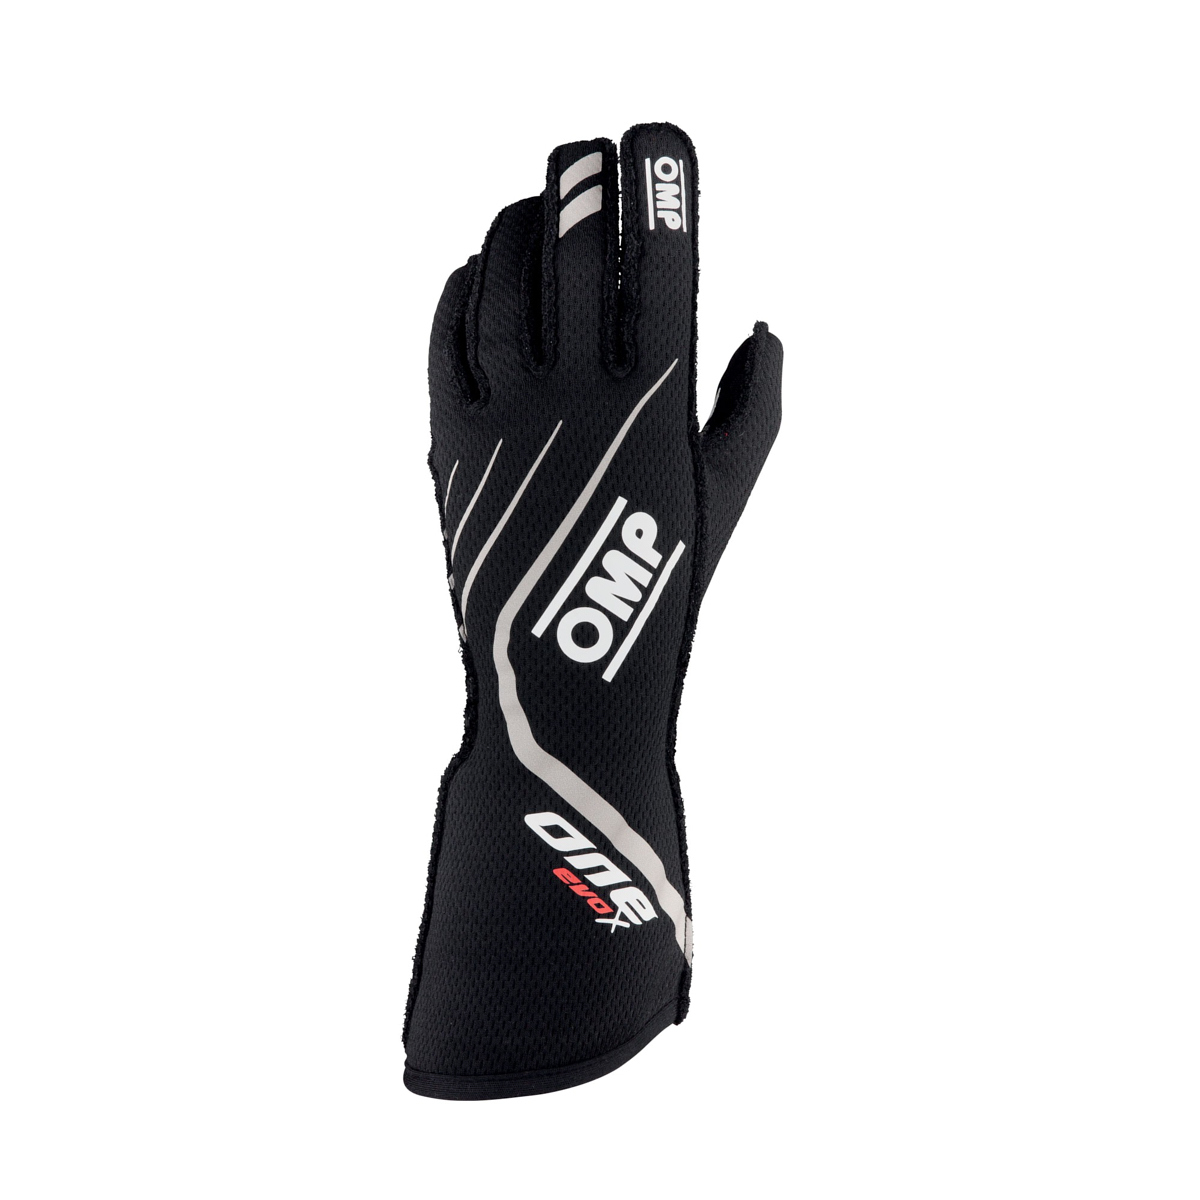 OMP Racing IB771NL Driving Gloves, One EVO X, FIA Approved, Double Layer, Fire Retardant Fabric, Black, Large, Pair